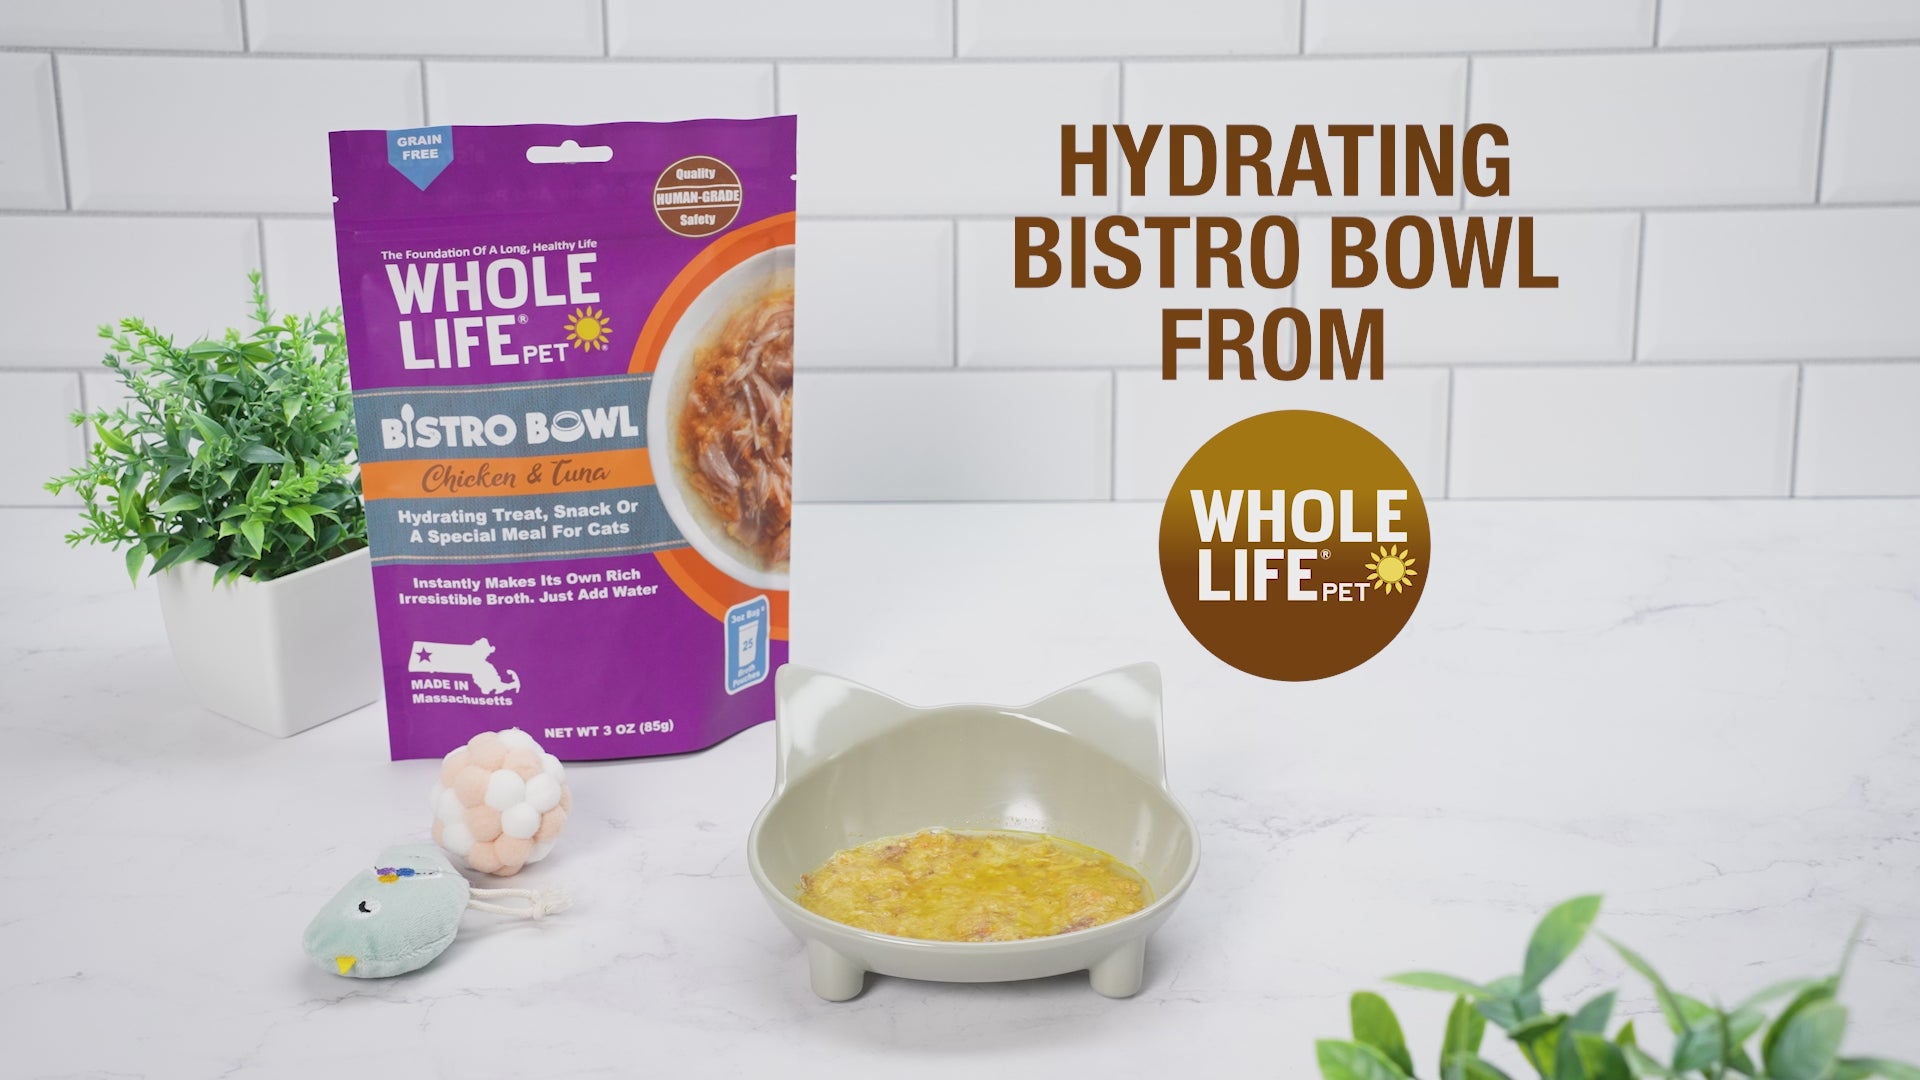 Bistro Bowls – Tuna & Salmon Hydrating Snack and Meal Compliment For Cats